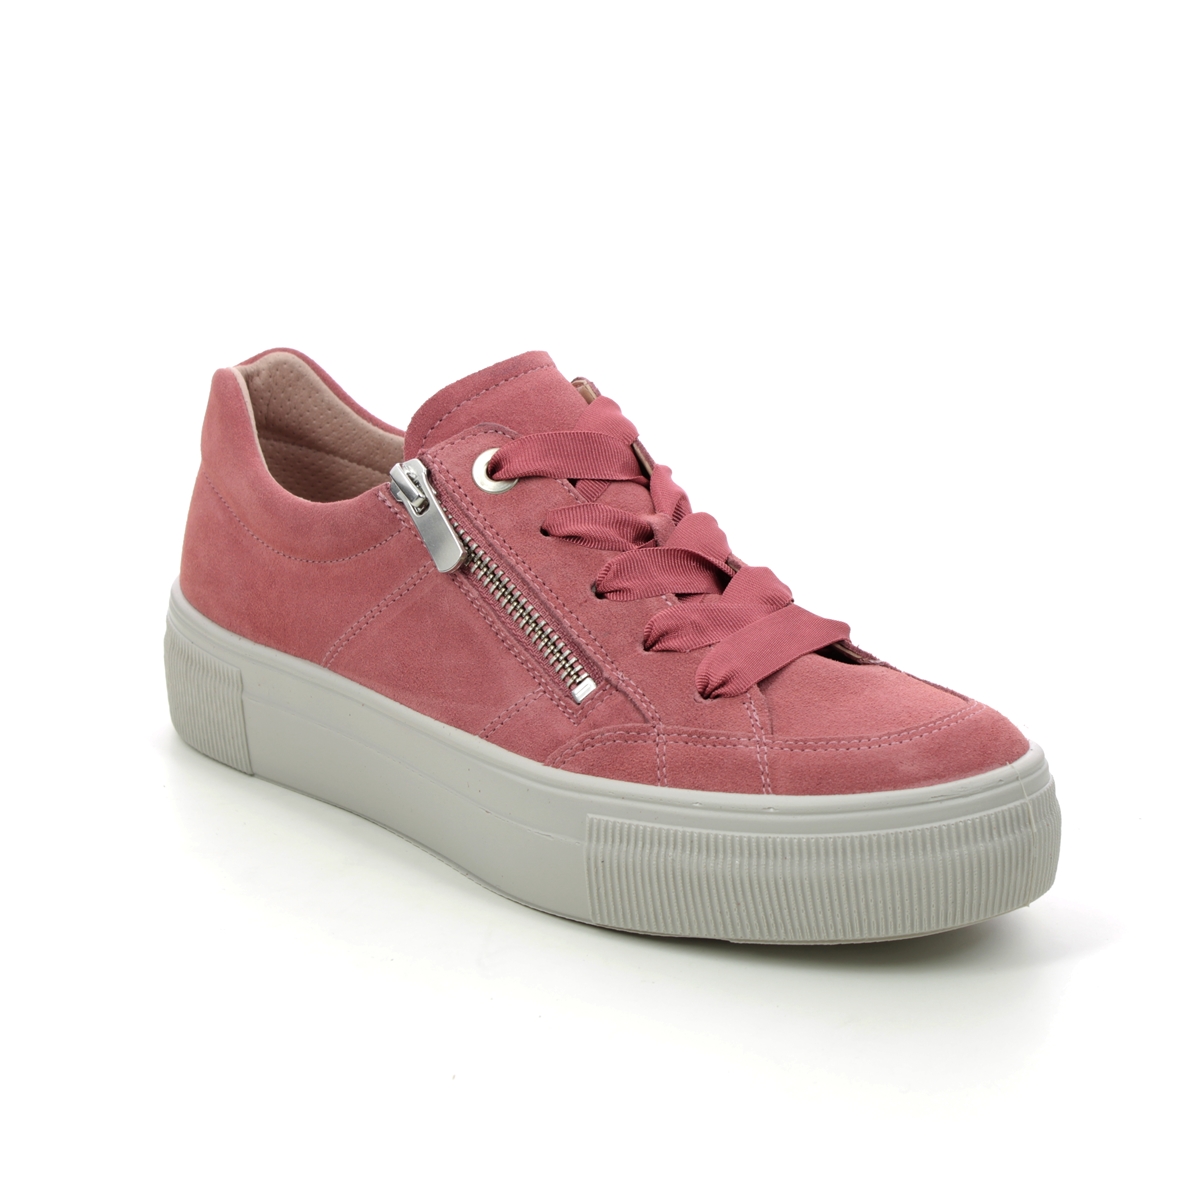 Legero Lima Zip Rose Pink Womens Trainers 2000911-5620 In Size 38 In Plain Rose Pink